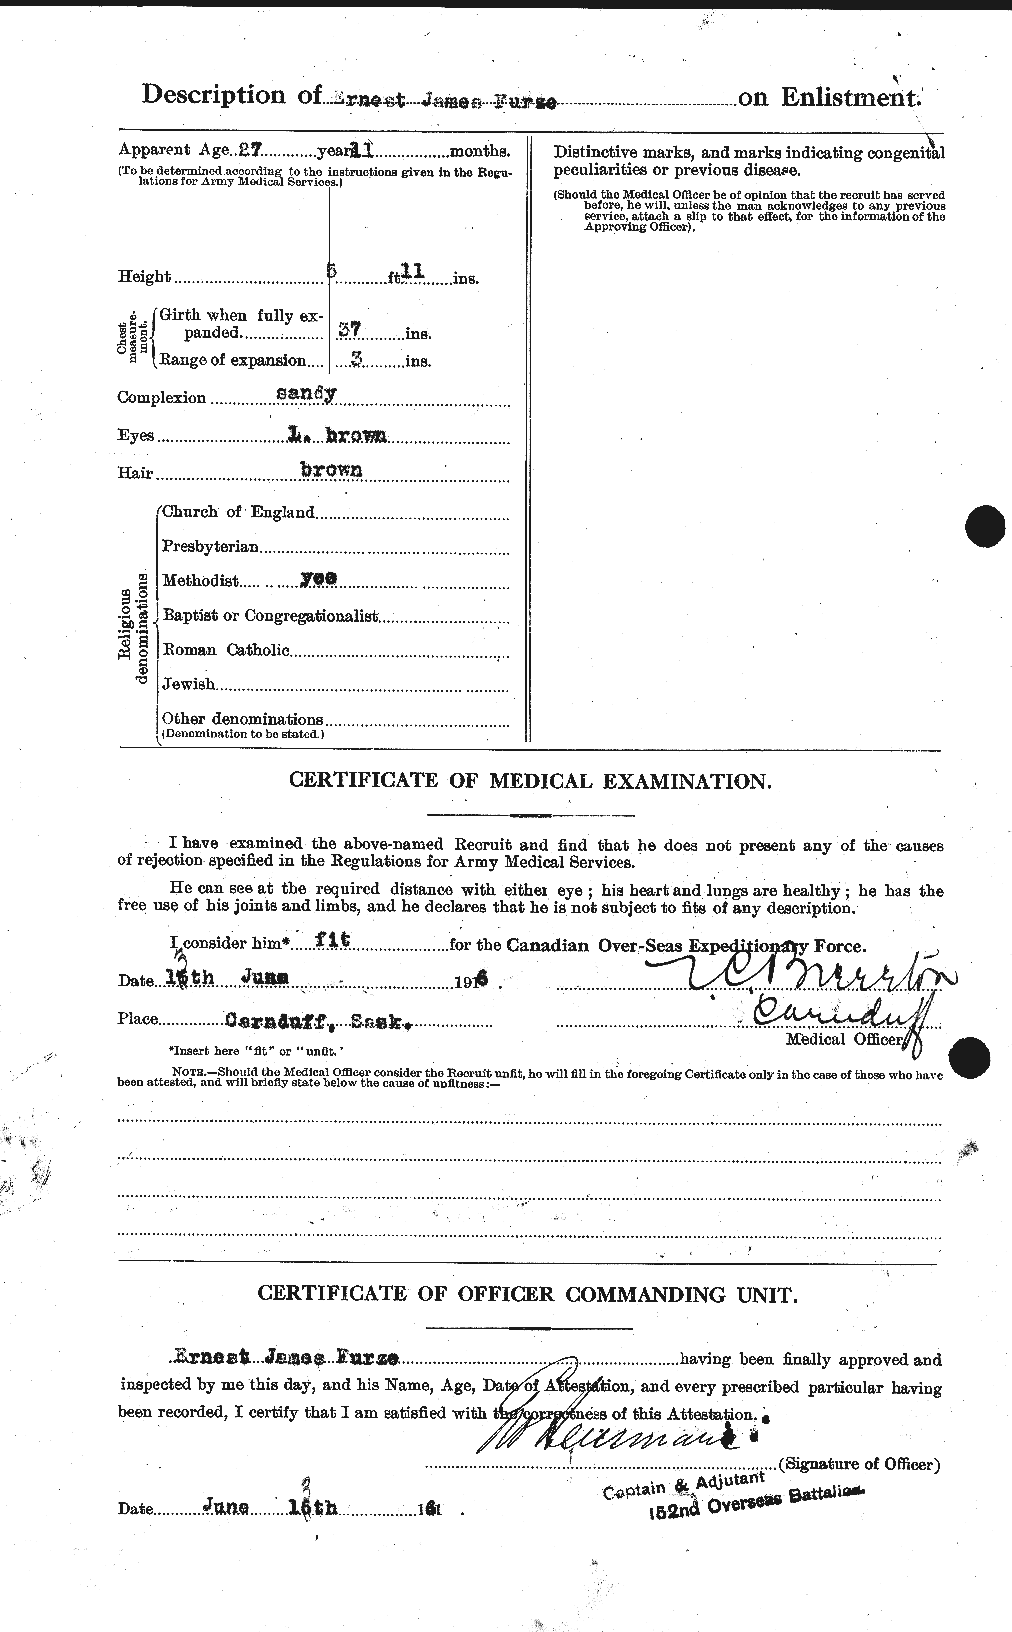 Personnel Records of the First World War - CEF 337727b